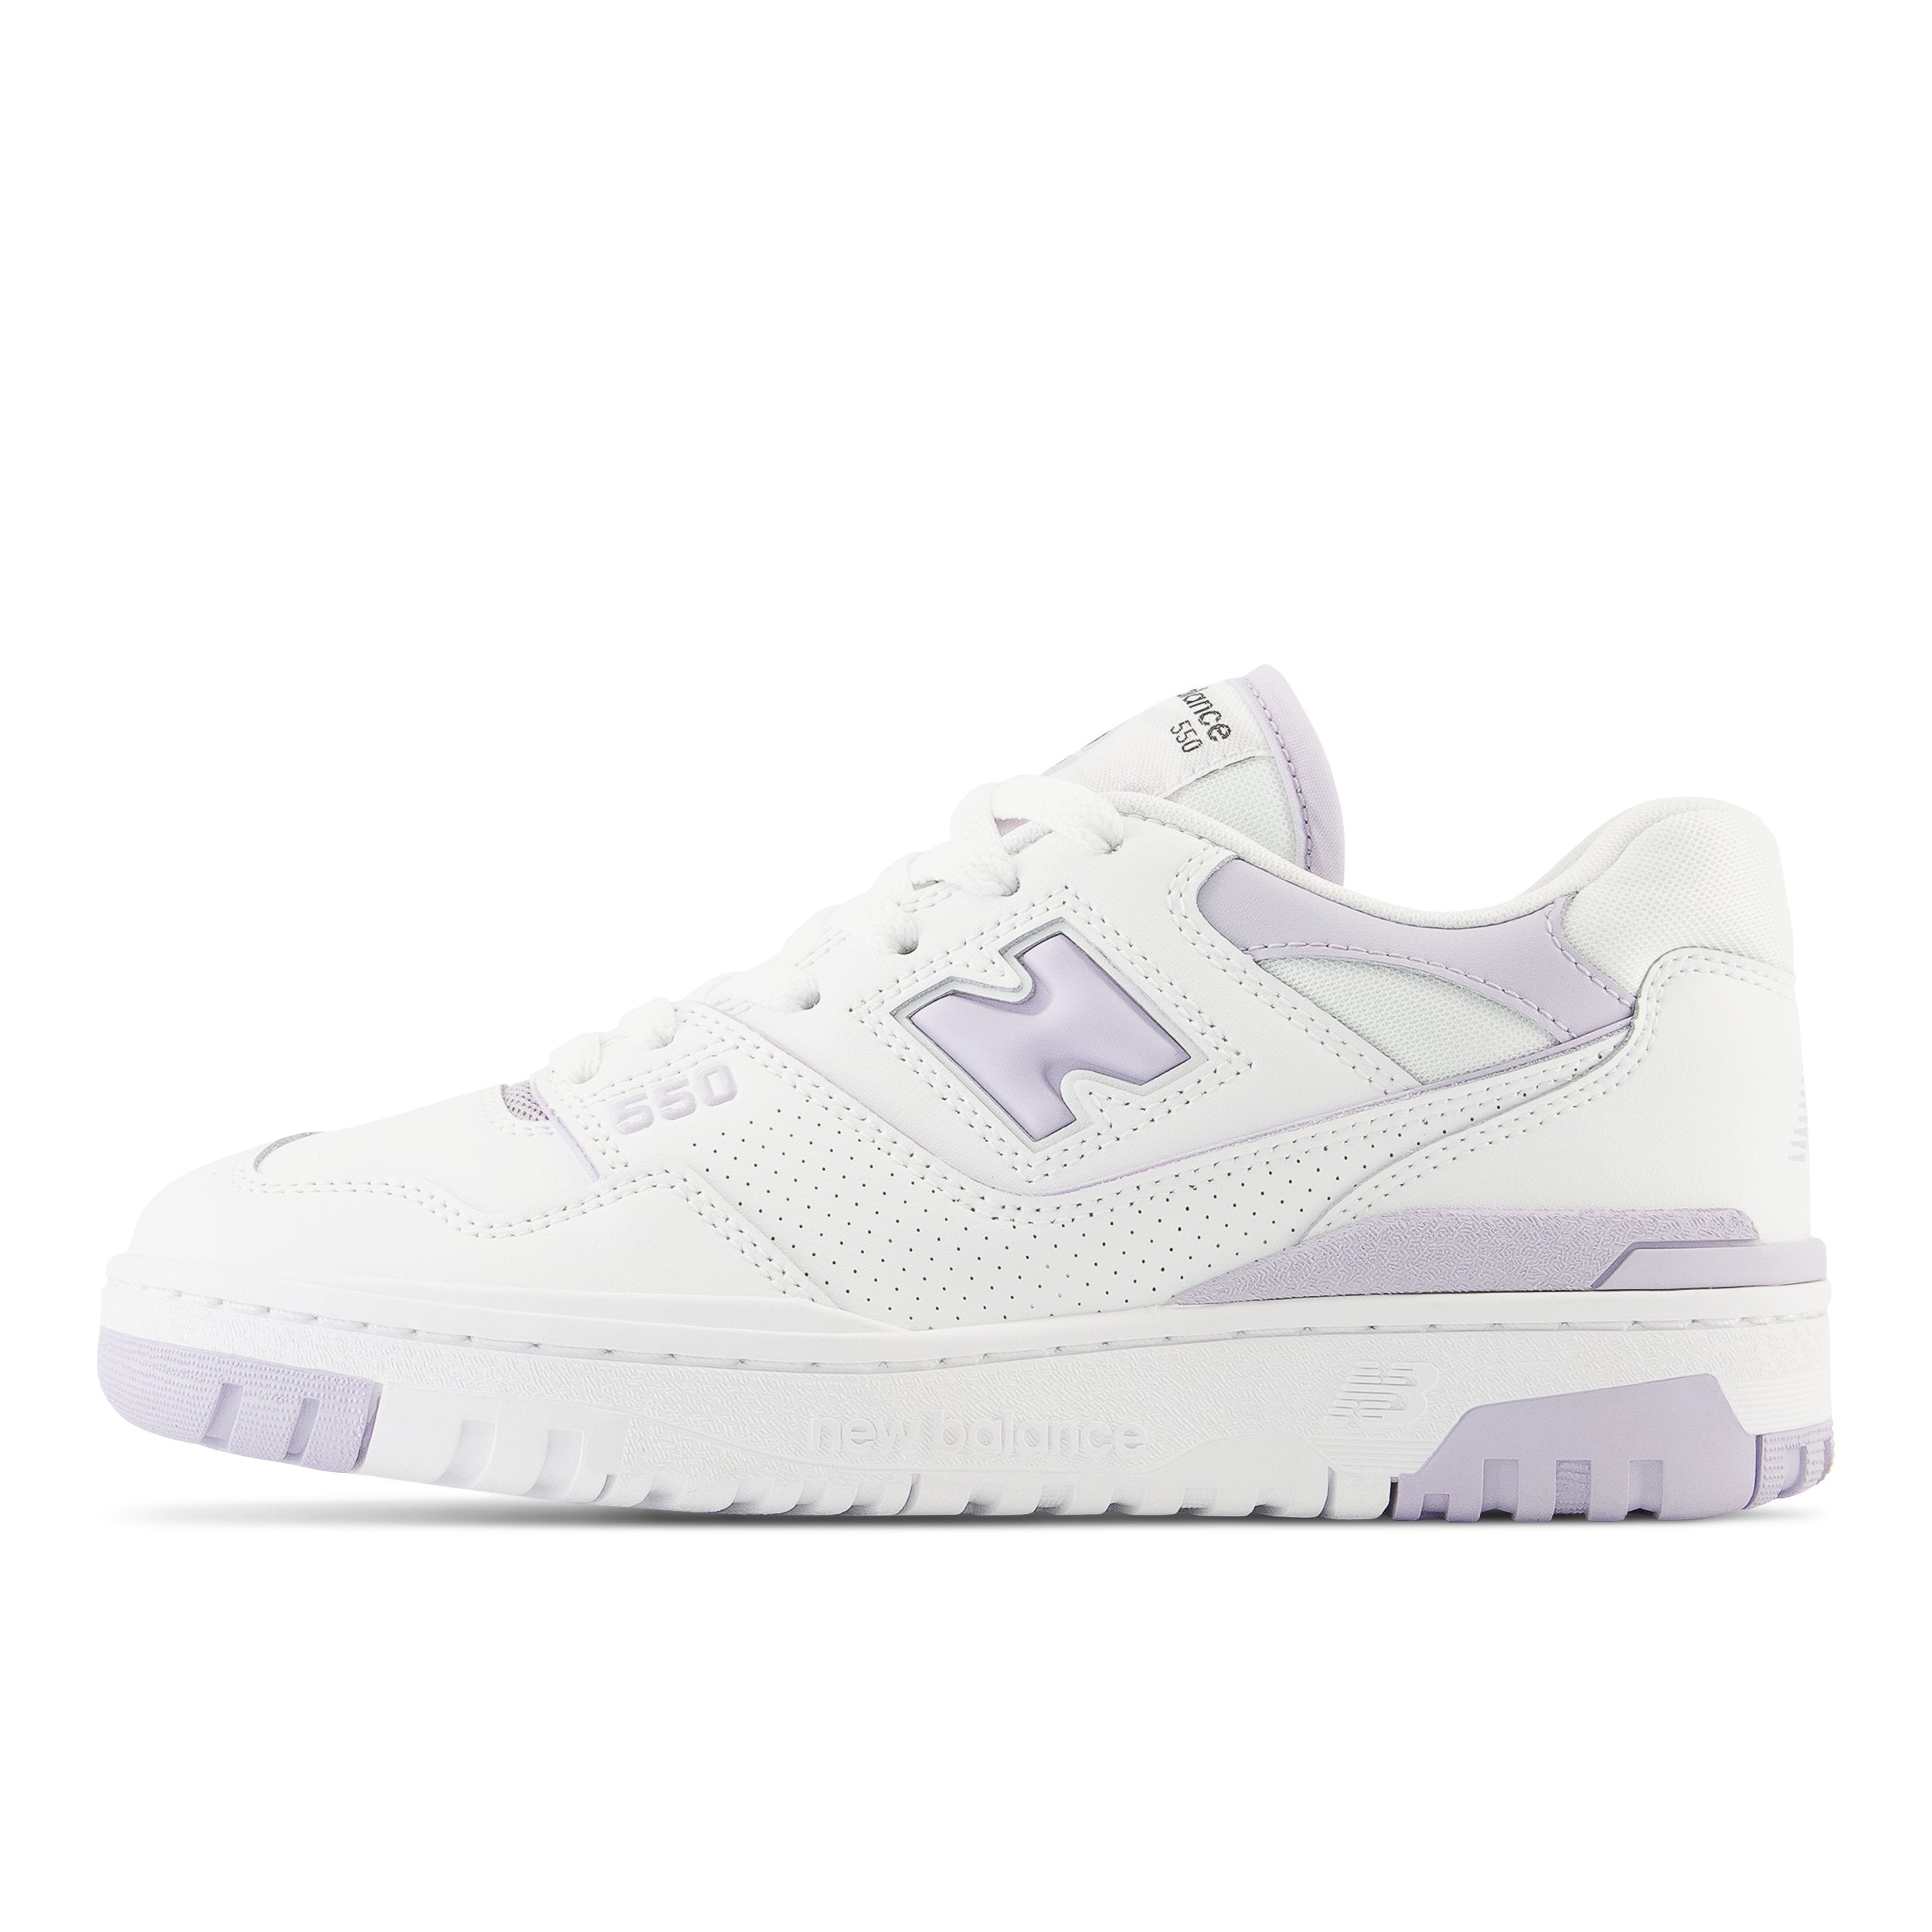 NEW BALANCE-Sneakers Donna 550-White/Grey Violet